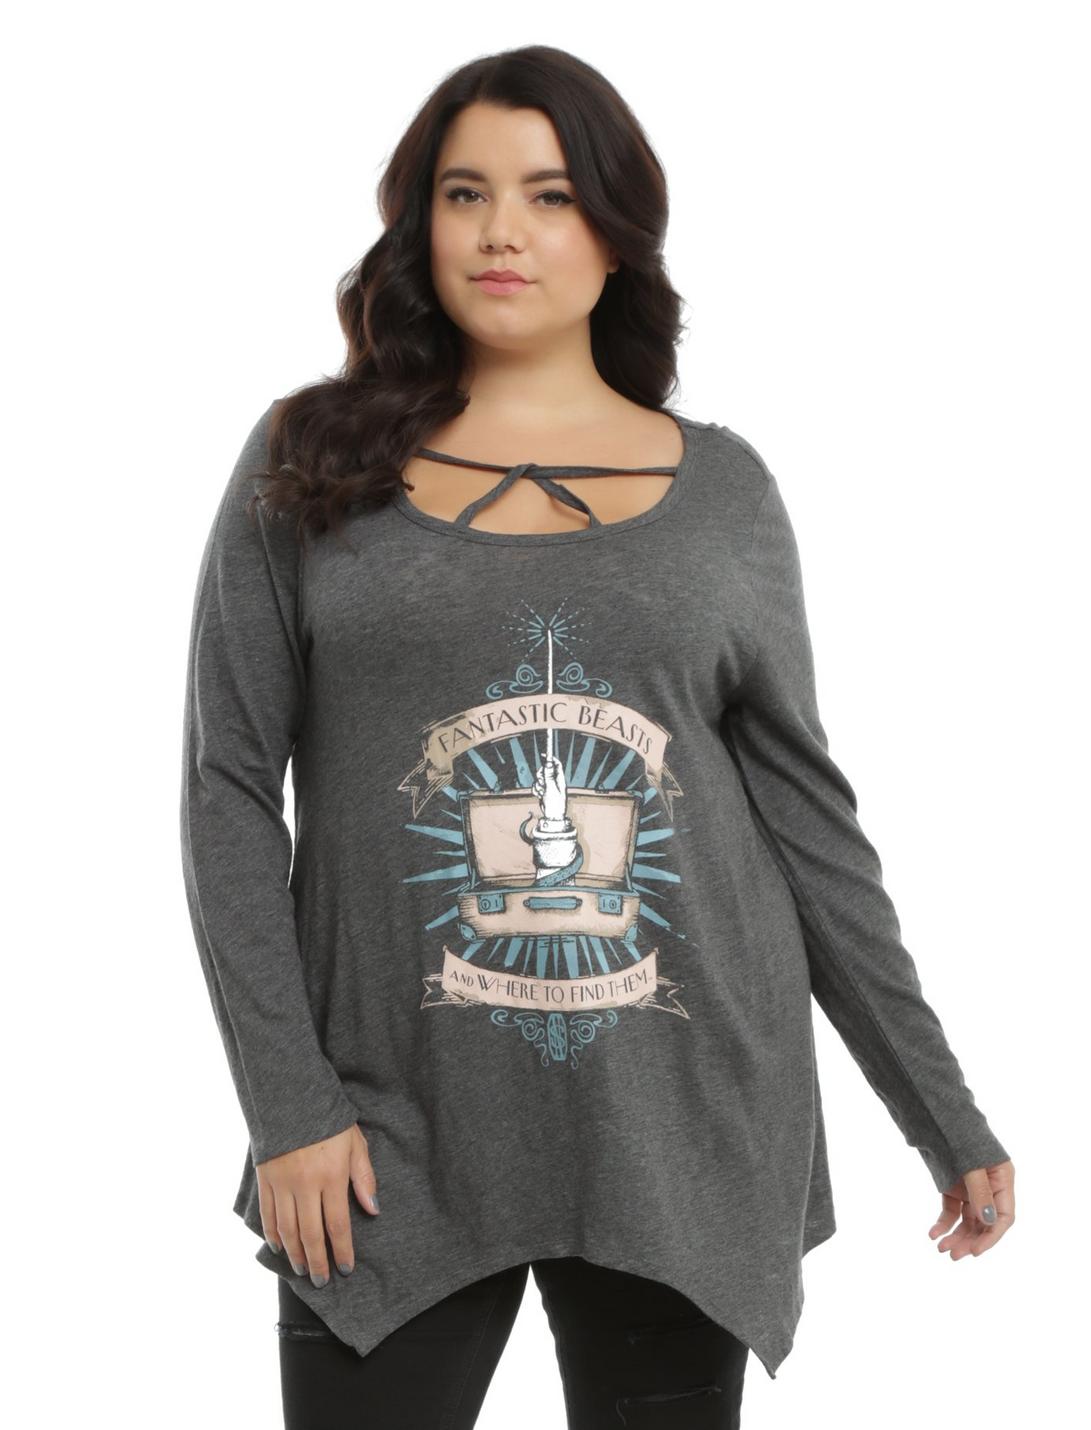 Fantastic Beasts And Where To Find Them Strappy Long-Sleeve Top Plus Size, GREY, hi-res